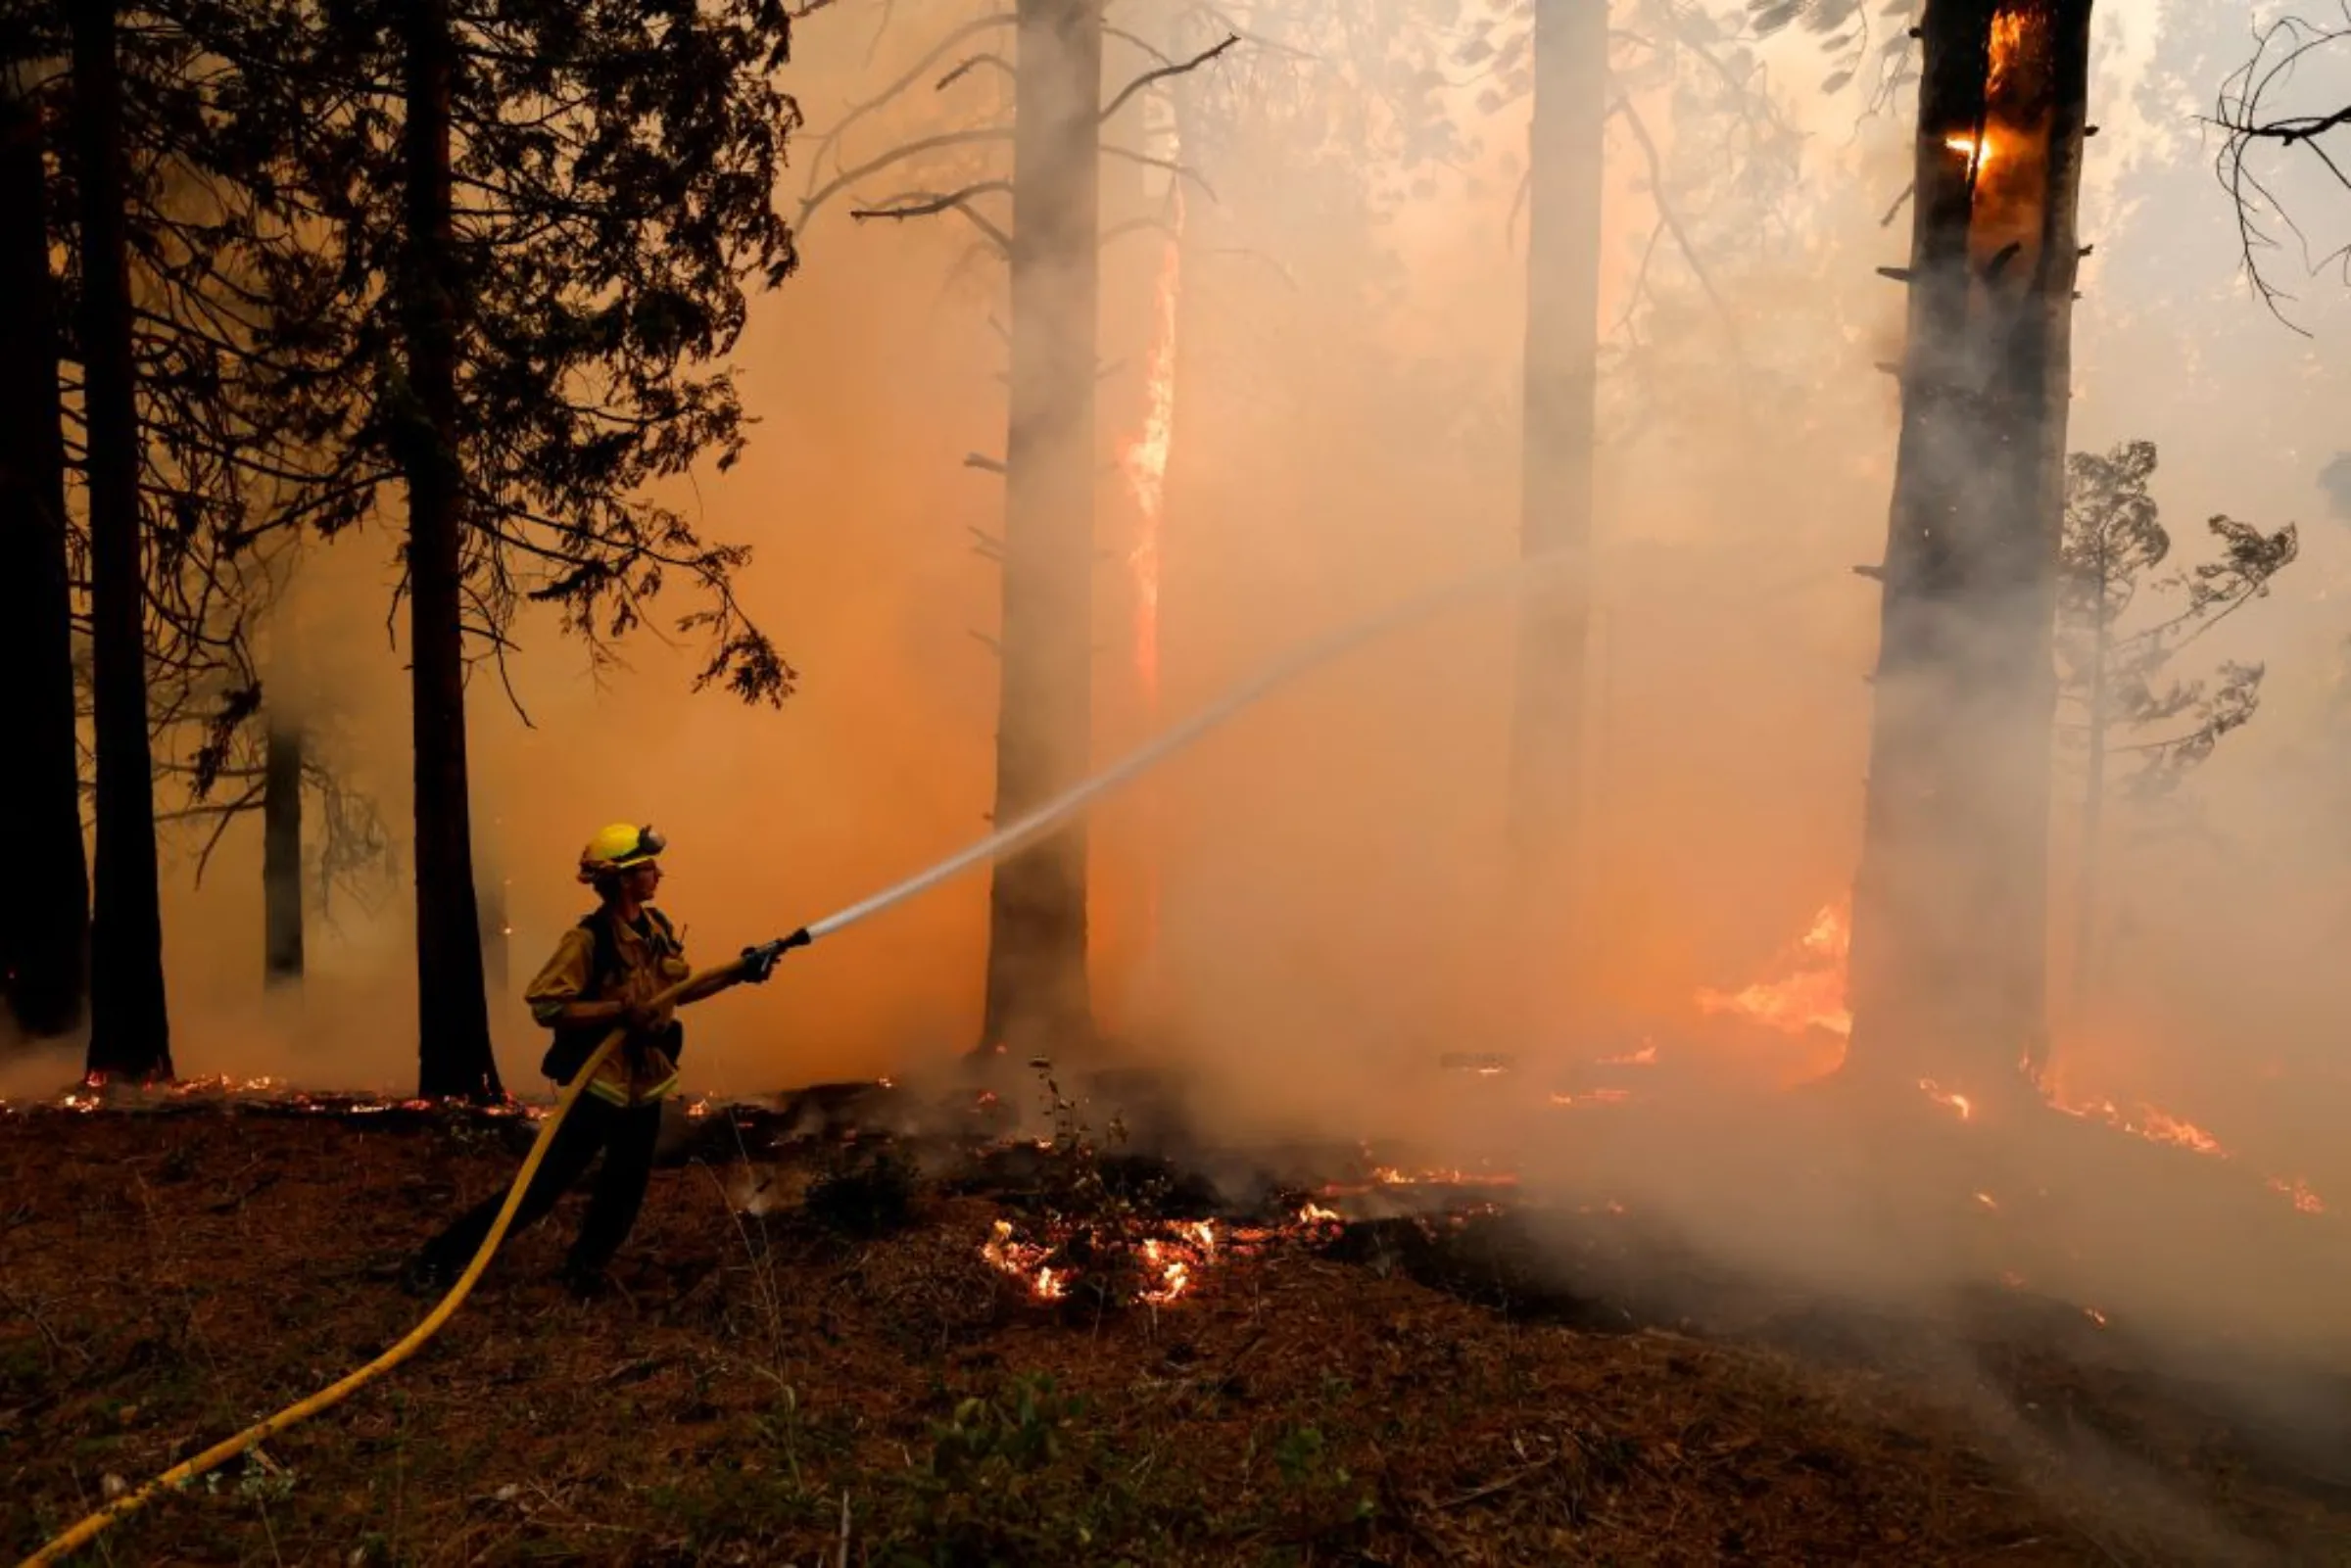 A firefighter hoses down flames from the Mosquito Fire as it burns in Foresthill in Placer County, California, U.S., September 7, 2022